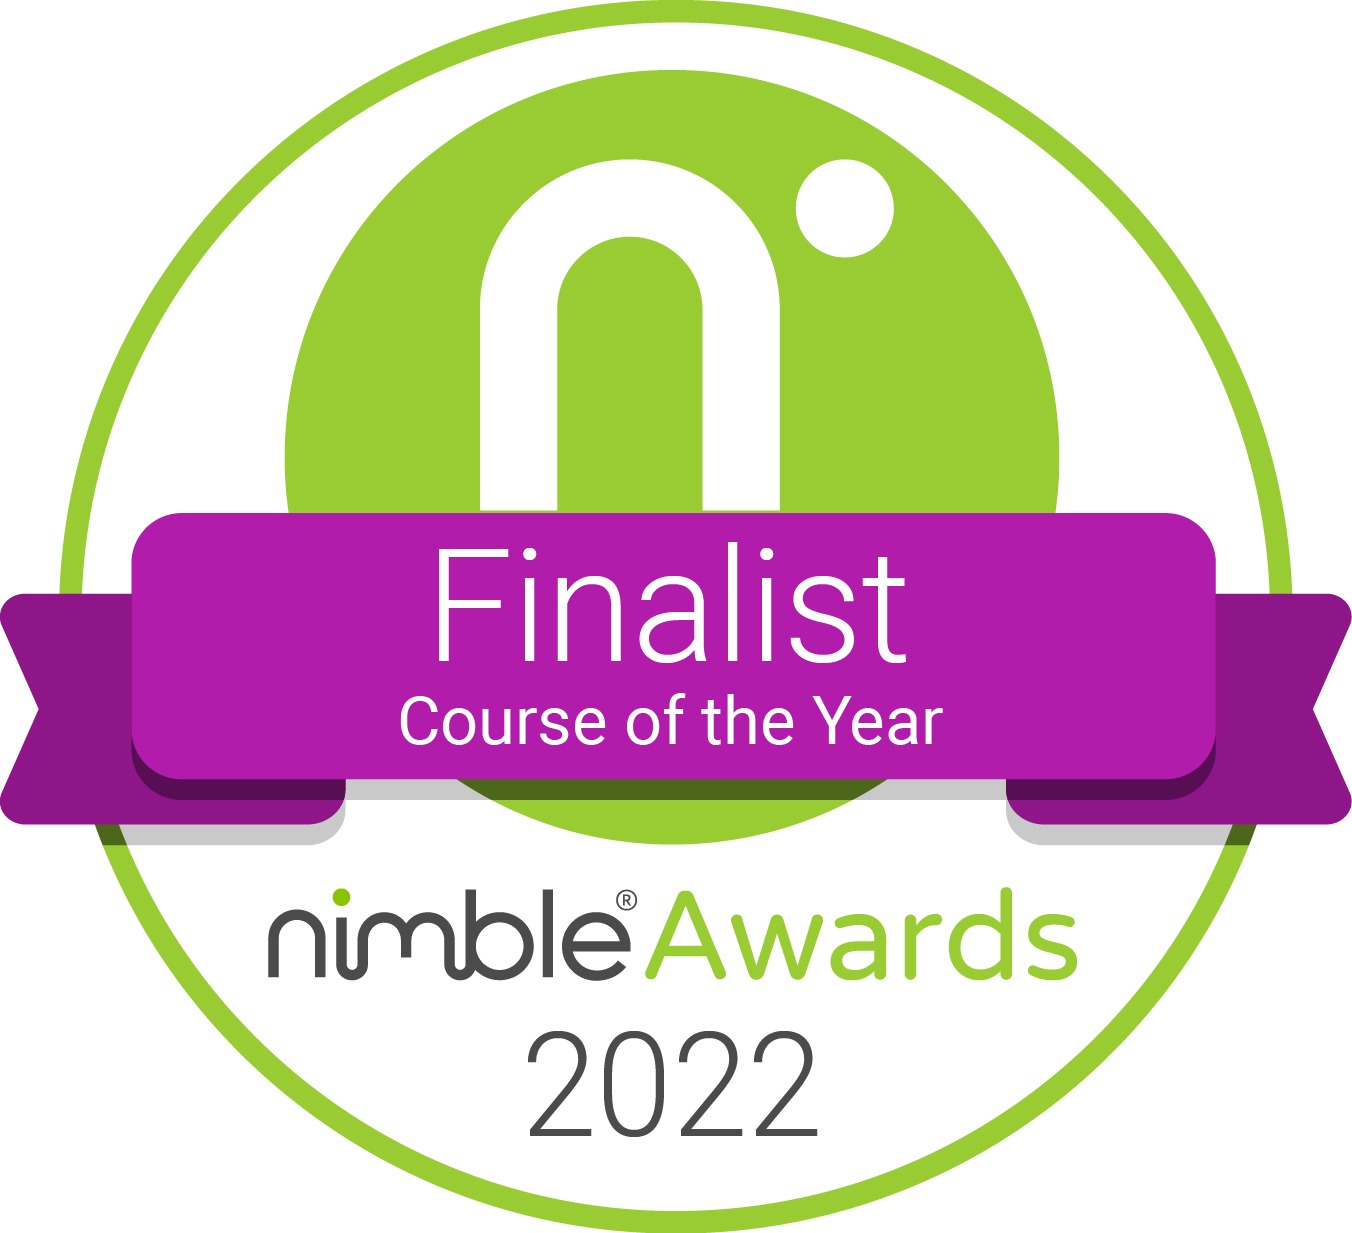 2022 Nimble Awards Finalist Course Of The Year